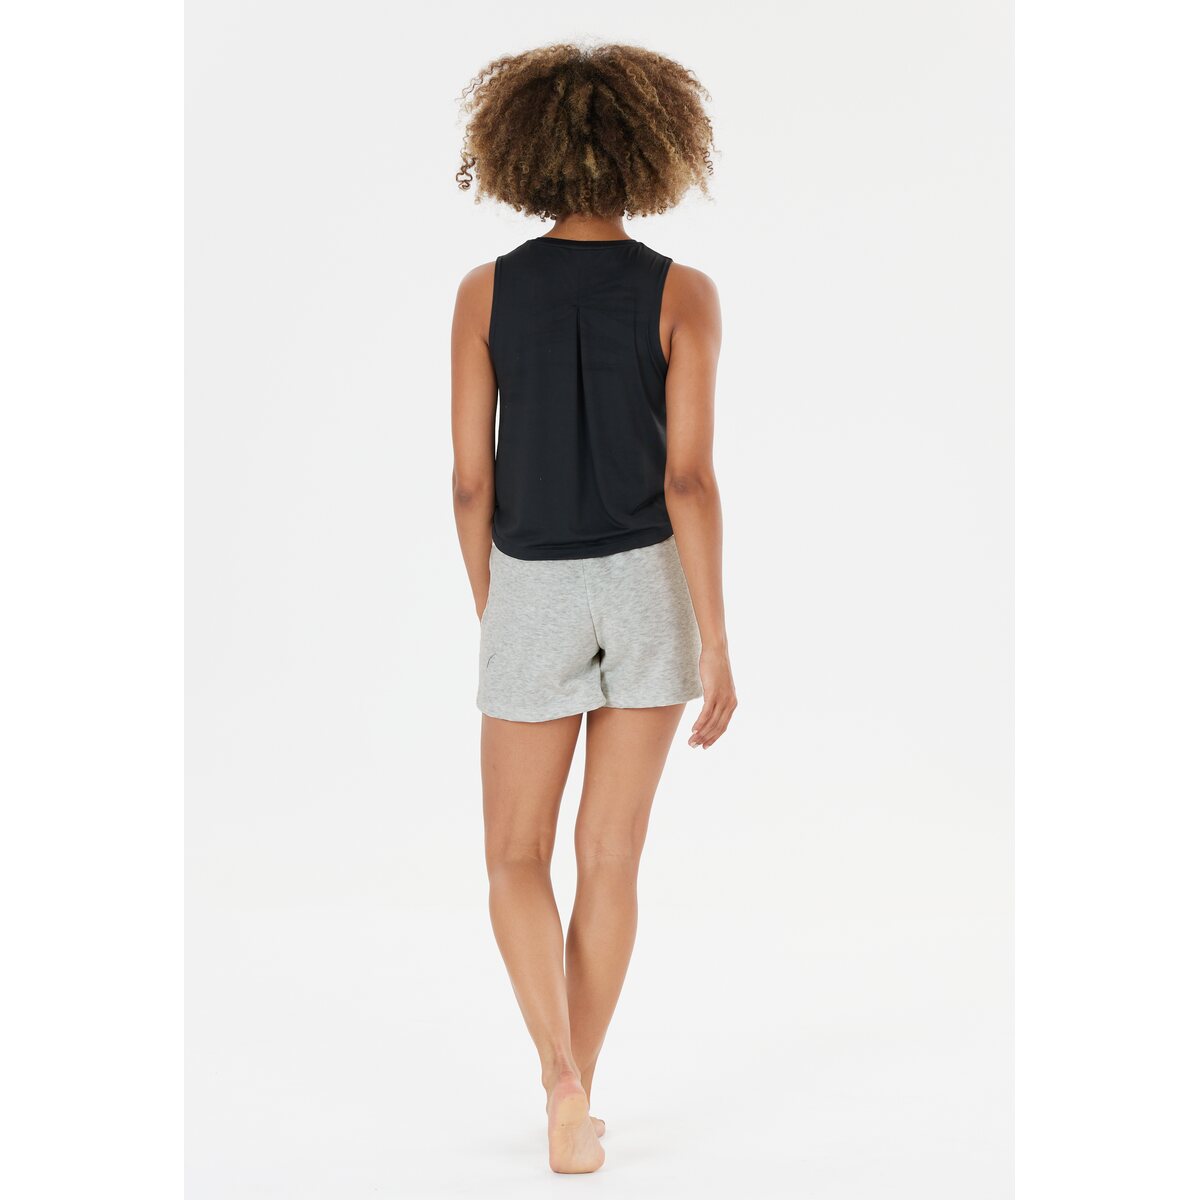 Athlecia Ruthie Womenswear Shorts 5 Shaws Department Stores